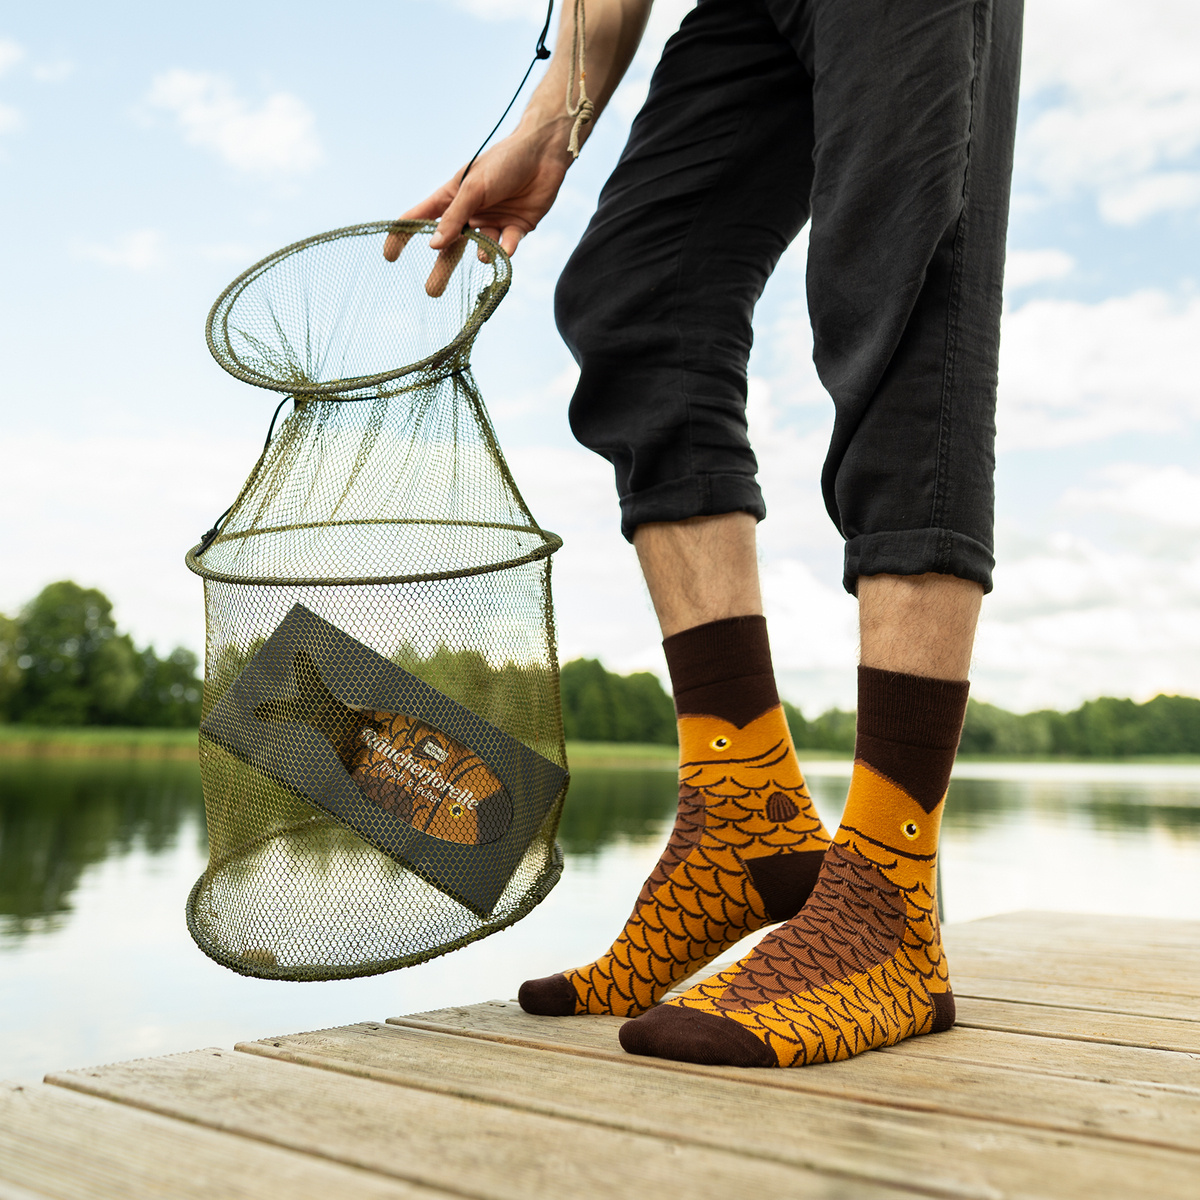 SOXO men's smoked trout socks in a pack